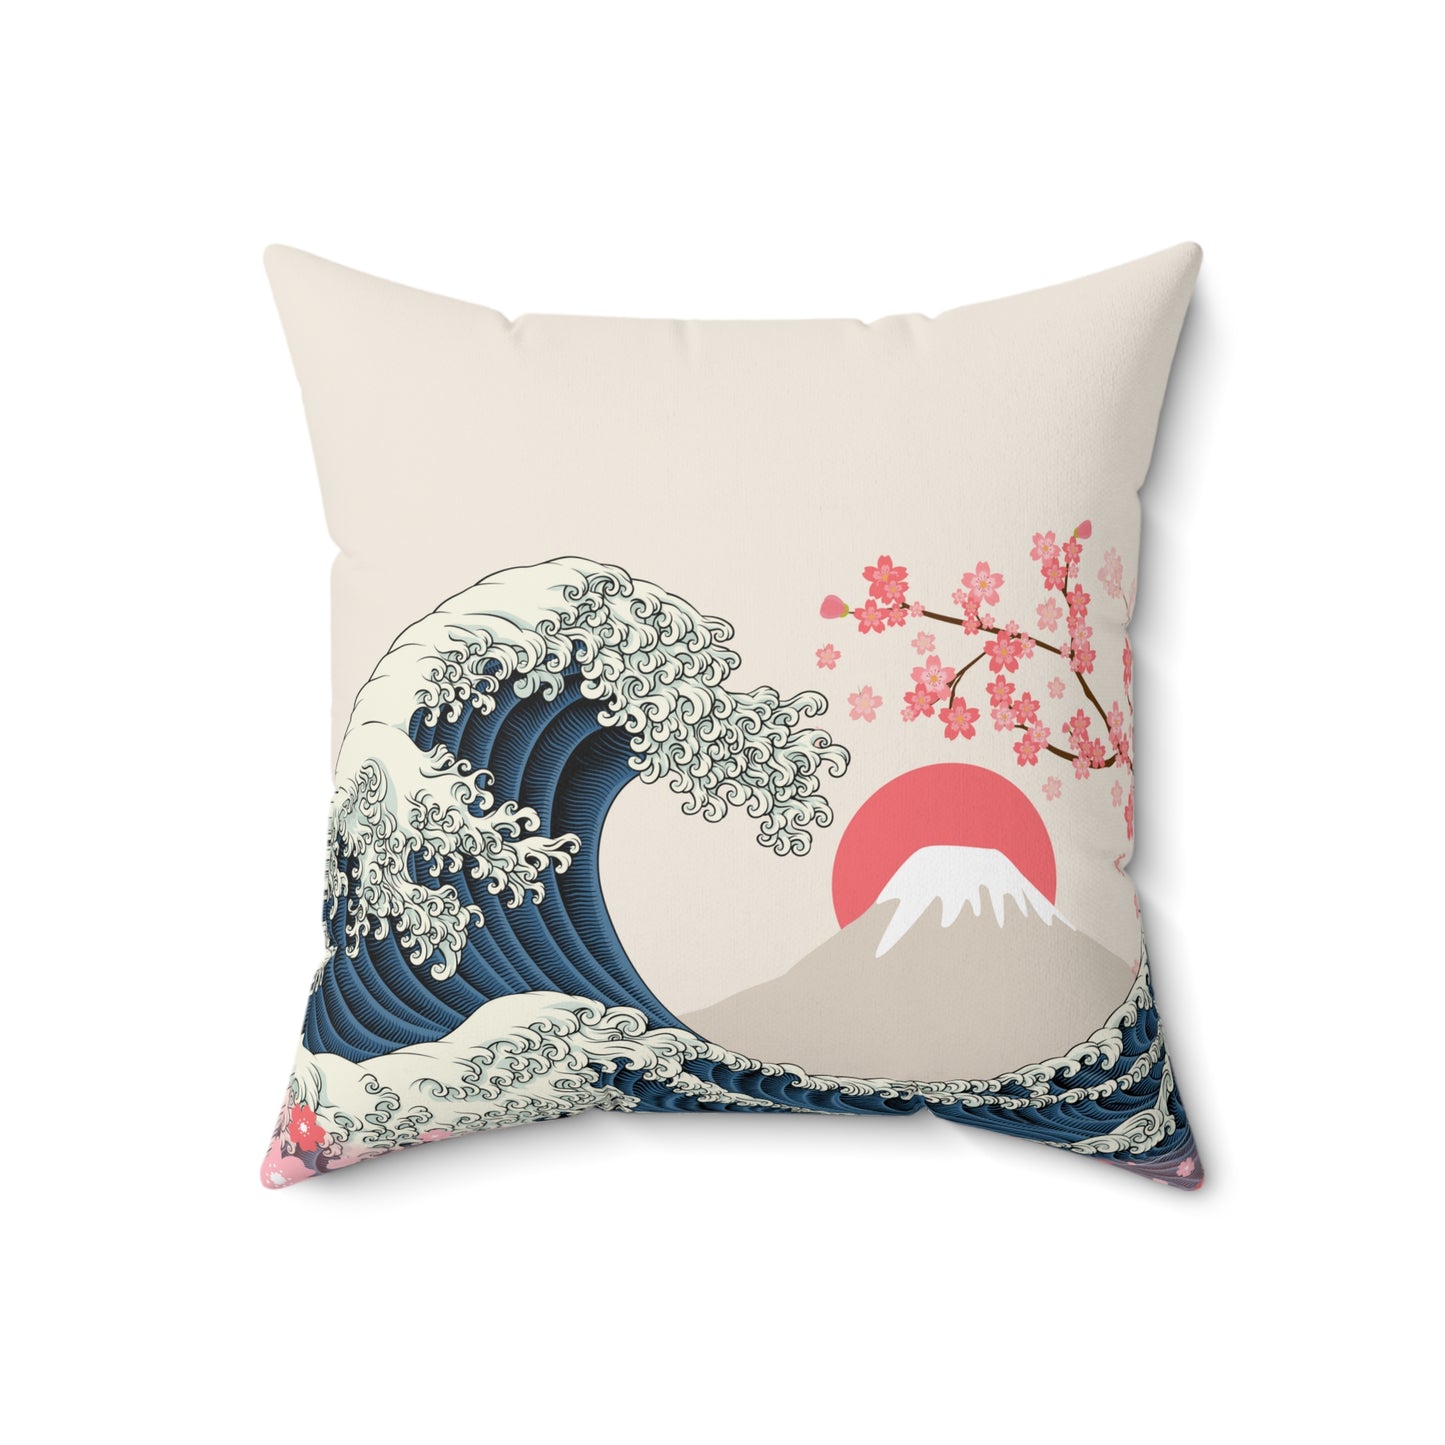 The Great Wave and Sakura Square Pillow